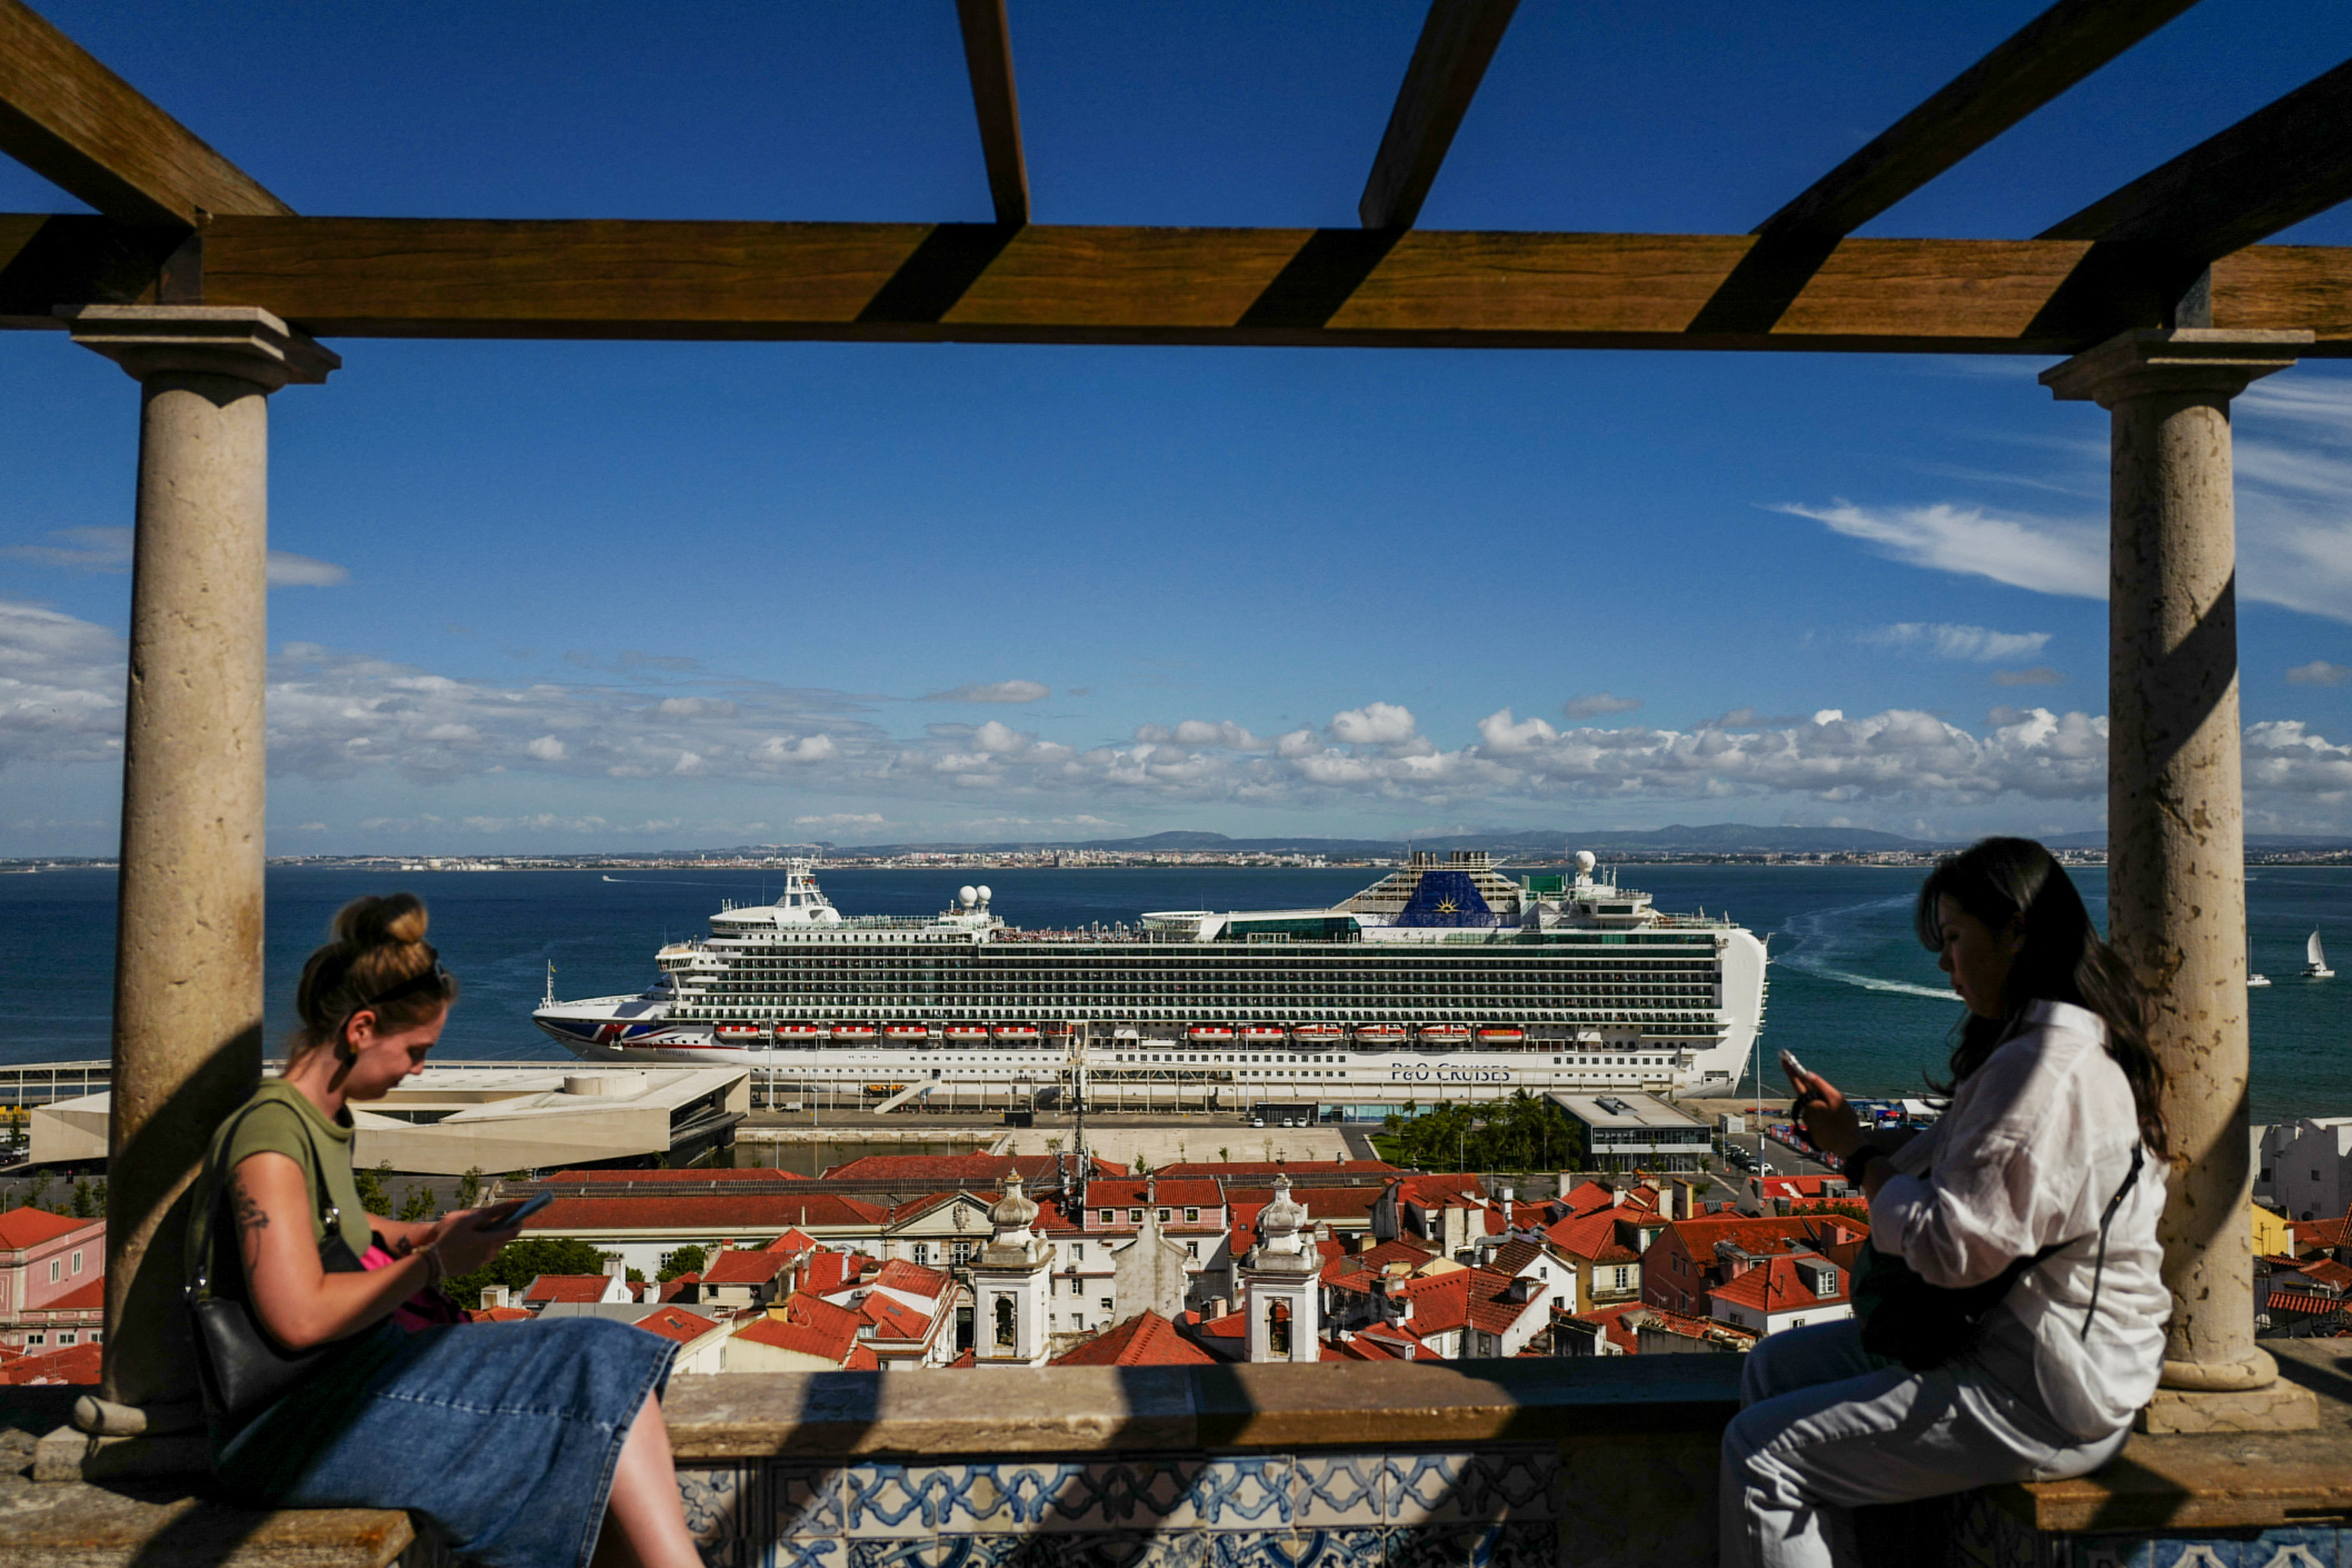 People stand in Santa Luzia viewpoint, while a cruise ship prepares to leave from the Cruise Port of Lisbon